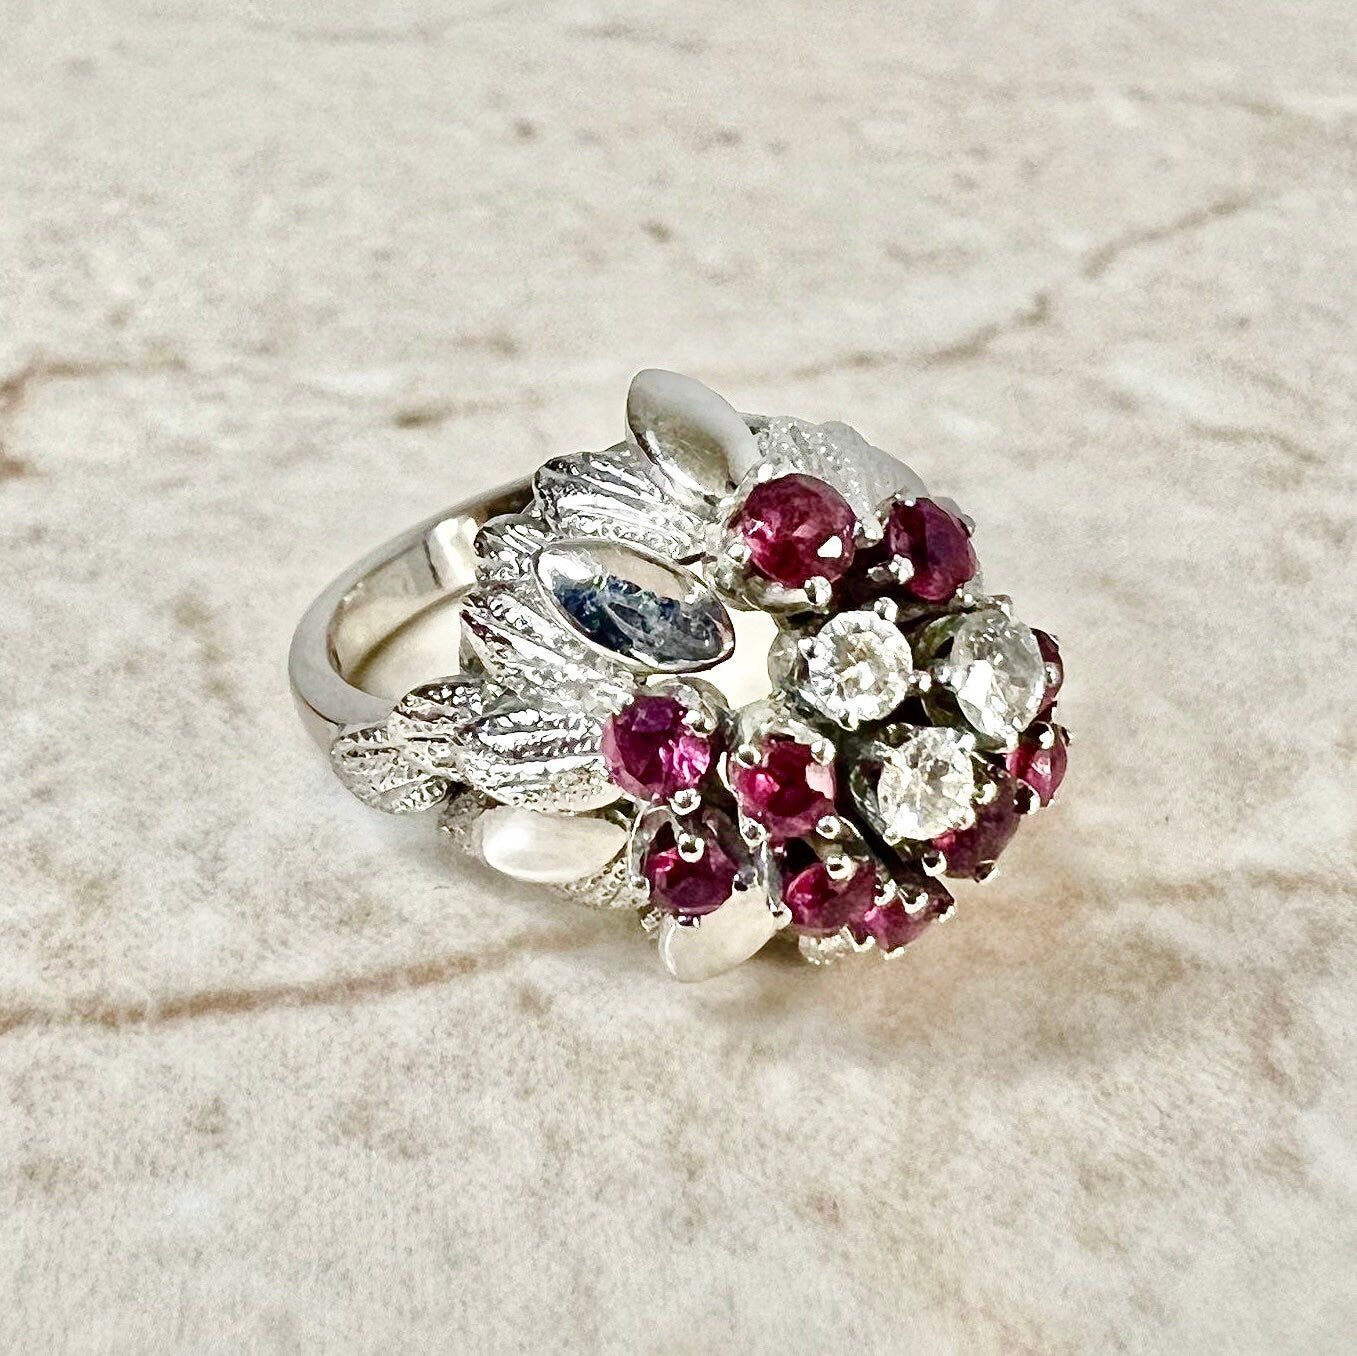 14K Vintage Diamond & Ruby Cocktail Ring - White Gold Ruby Ring - Ruby Cluster Ring -April July Birthstone-Christmas Gift-Best Gifts For Her